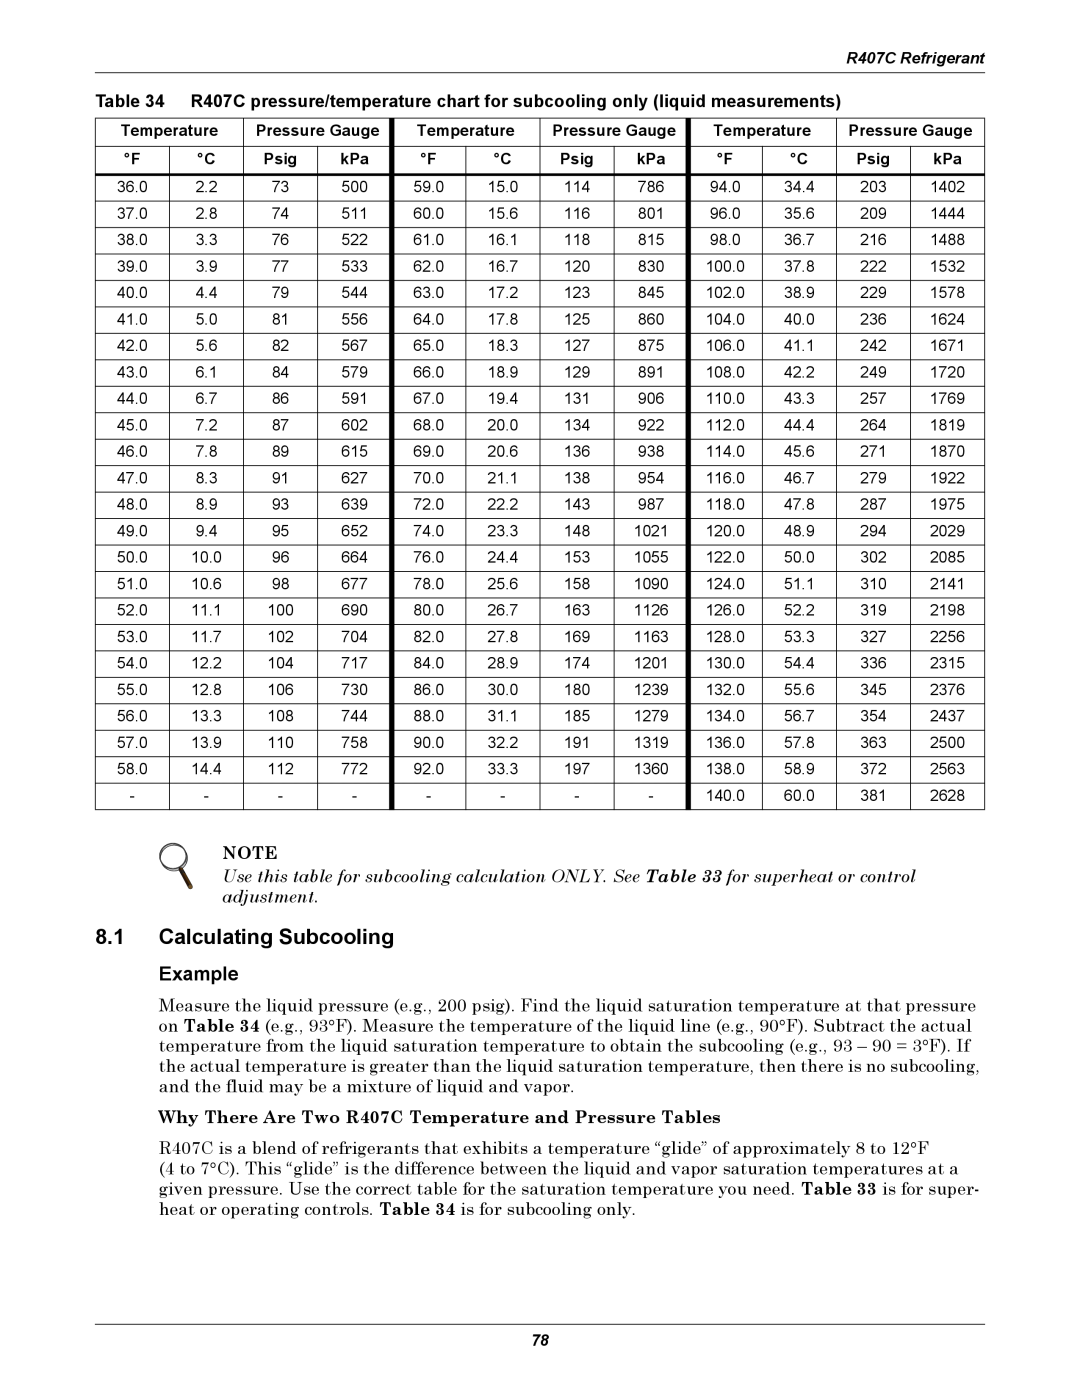 Emerson 3000 installation manual 8.1Calculating Subcooling 